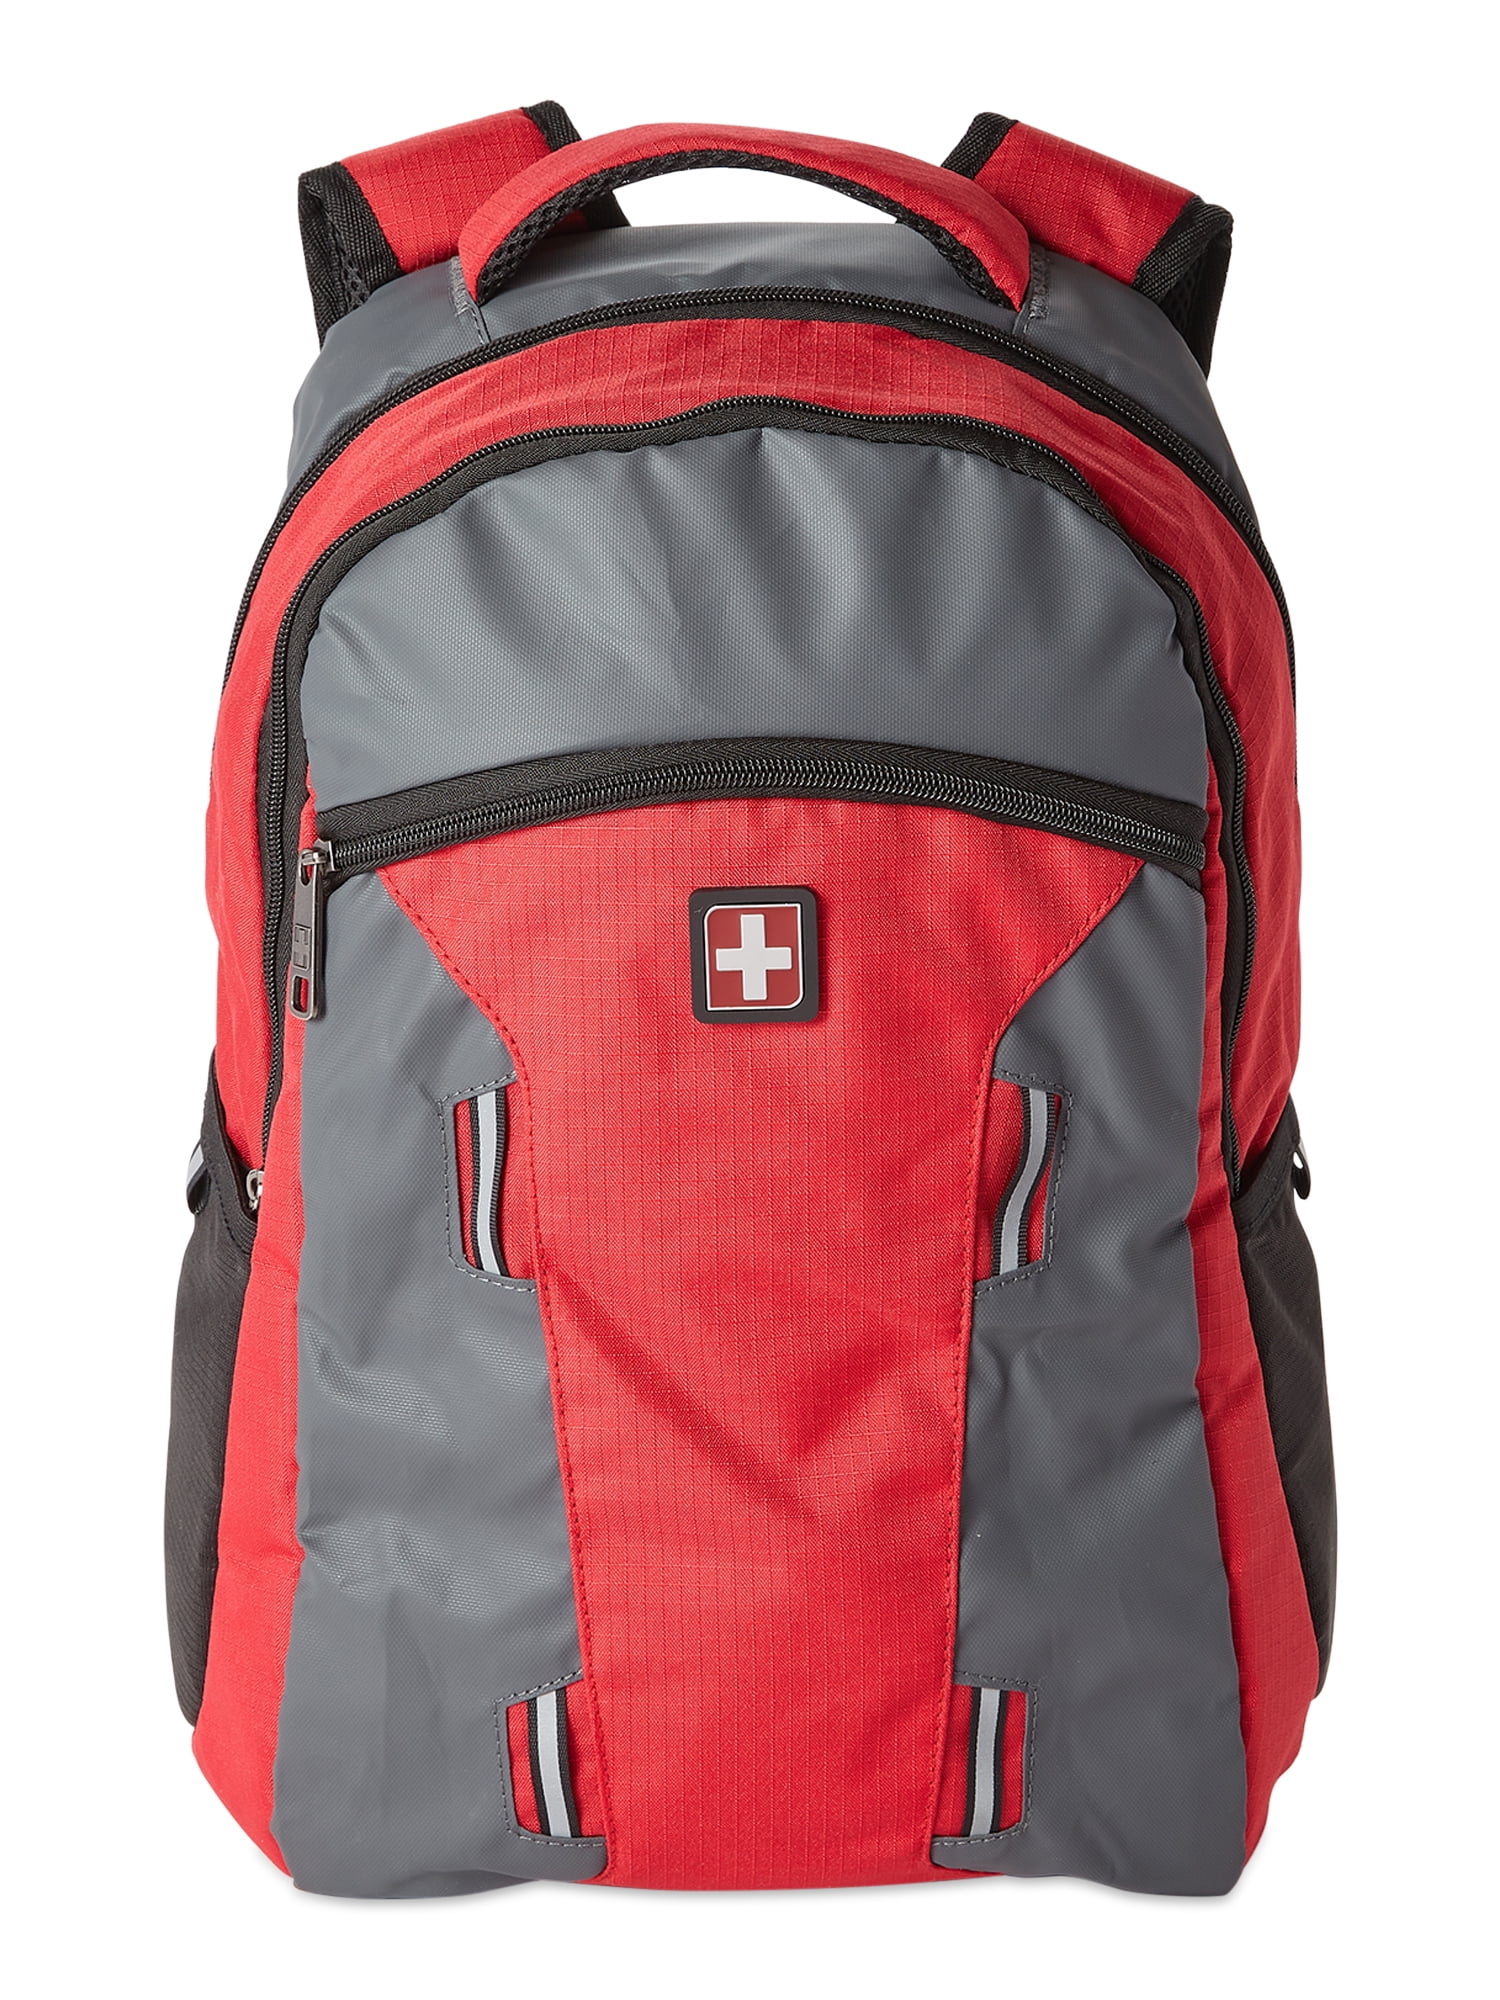 Swiss Tech Gray and Red Reflective Backpack 